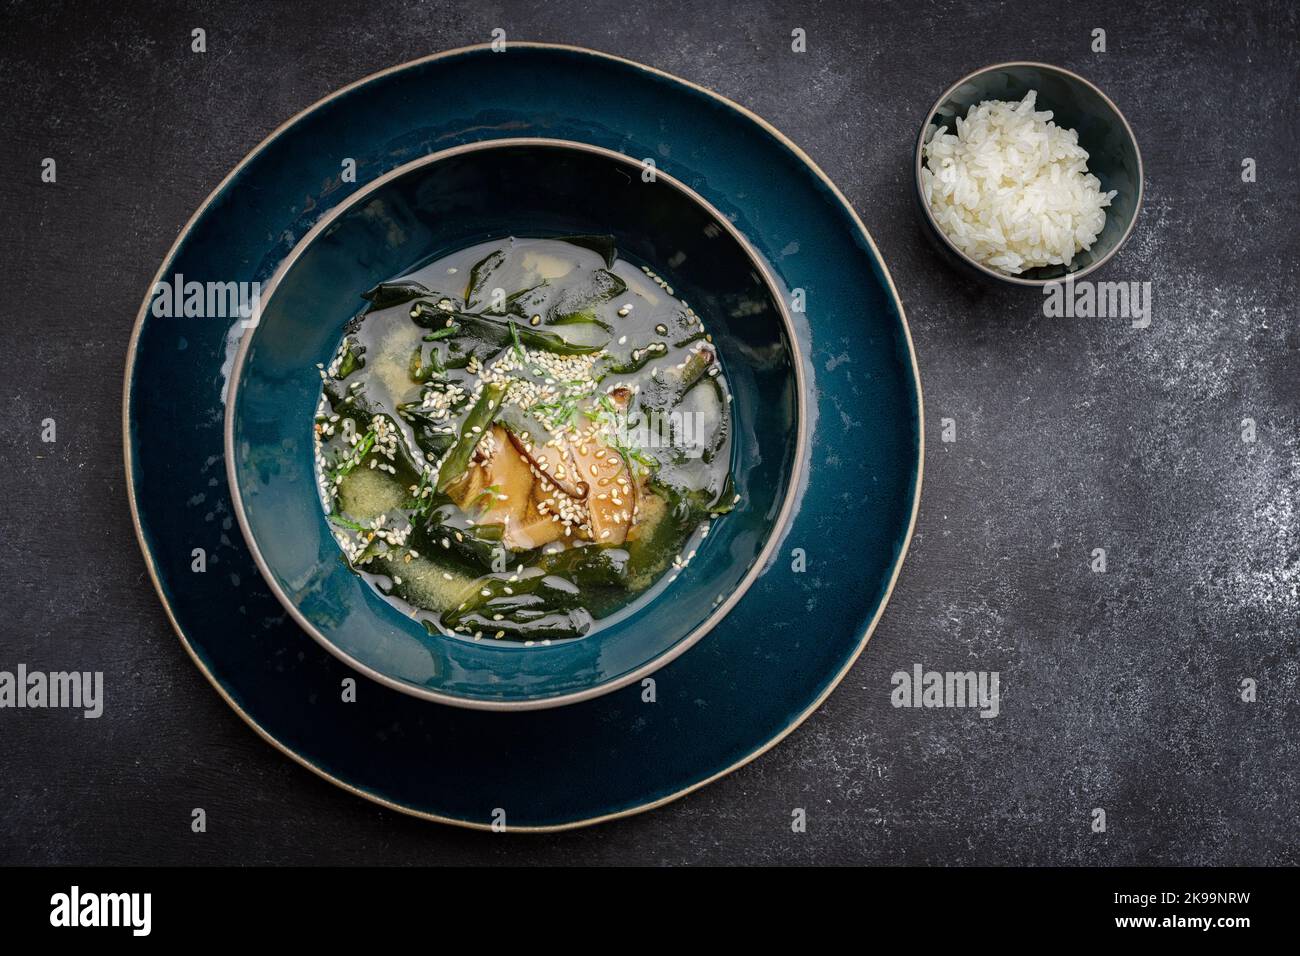 Miso soup with shiitake mushrooms and rice on a dark background Stock Photo